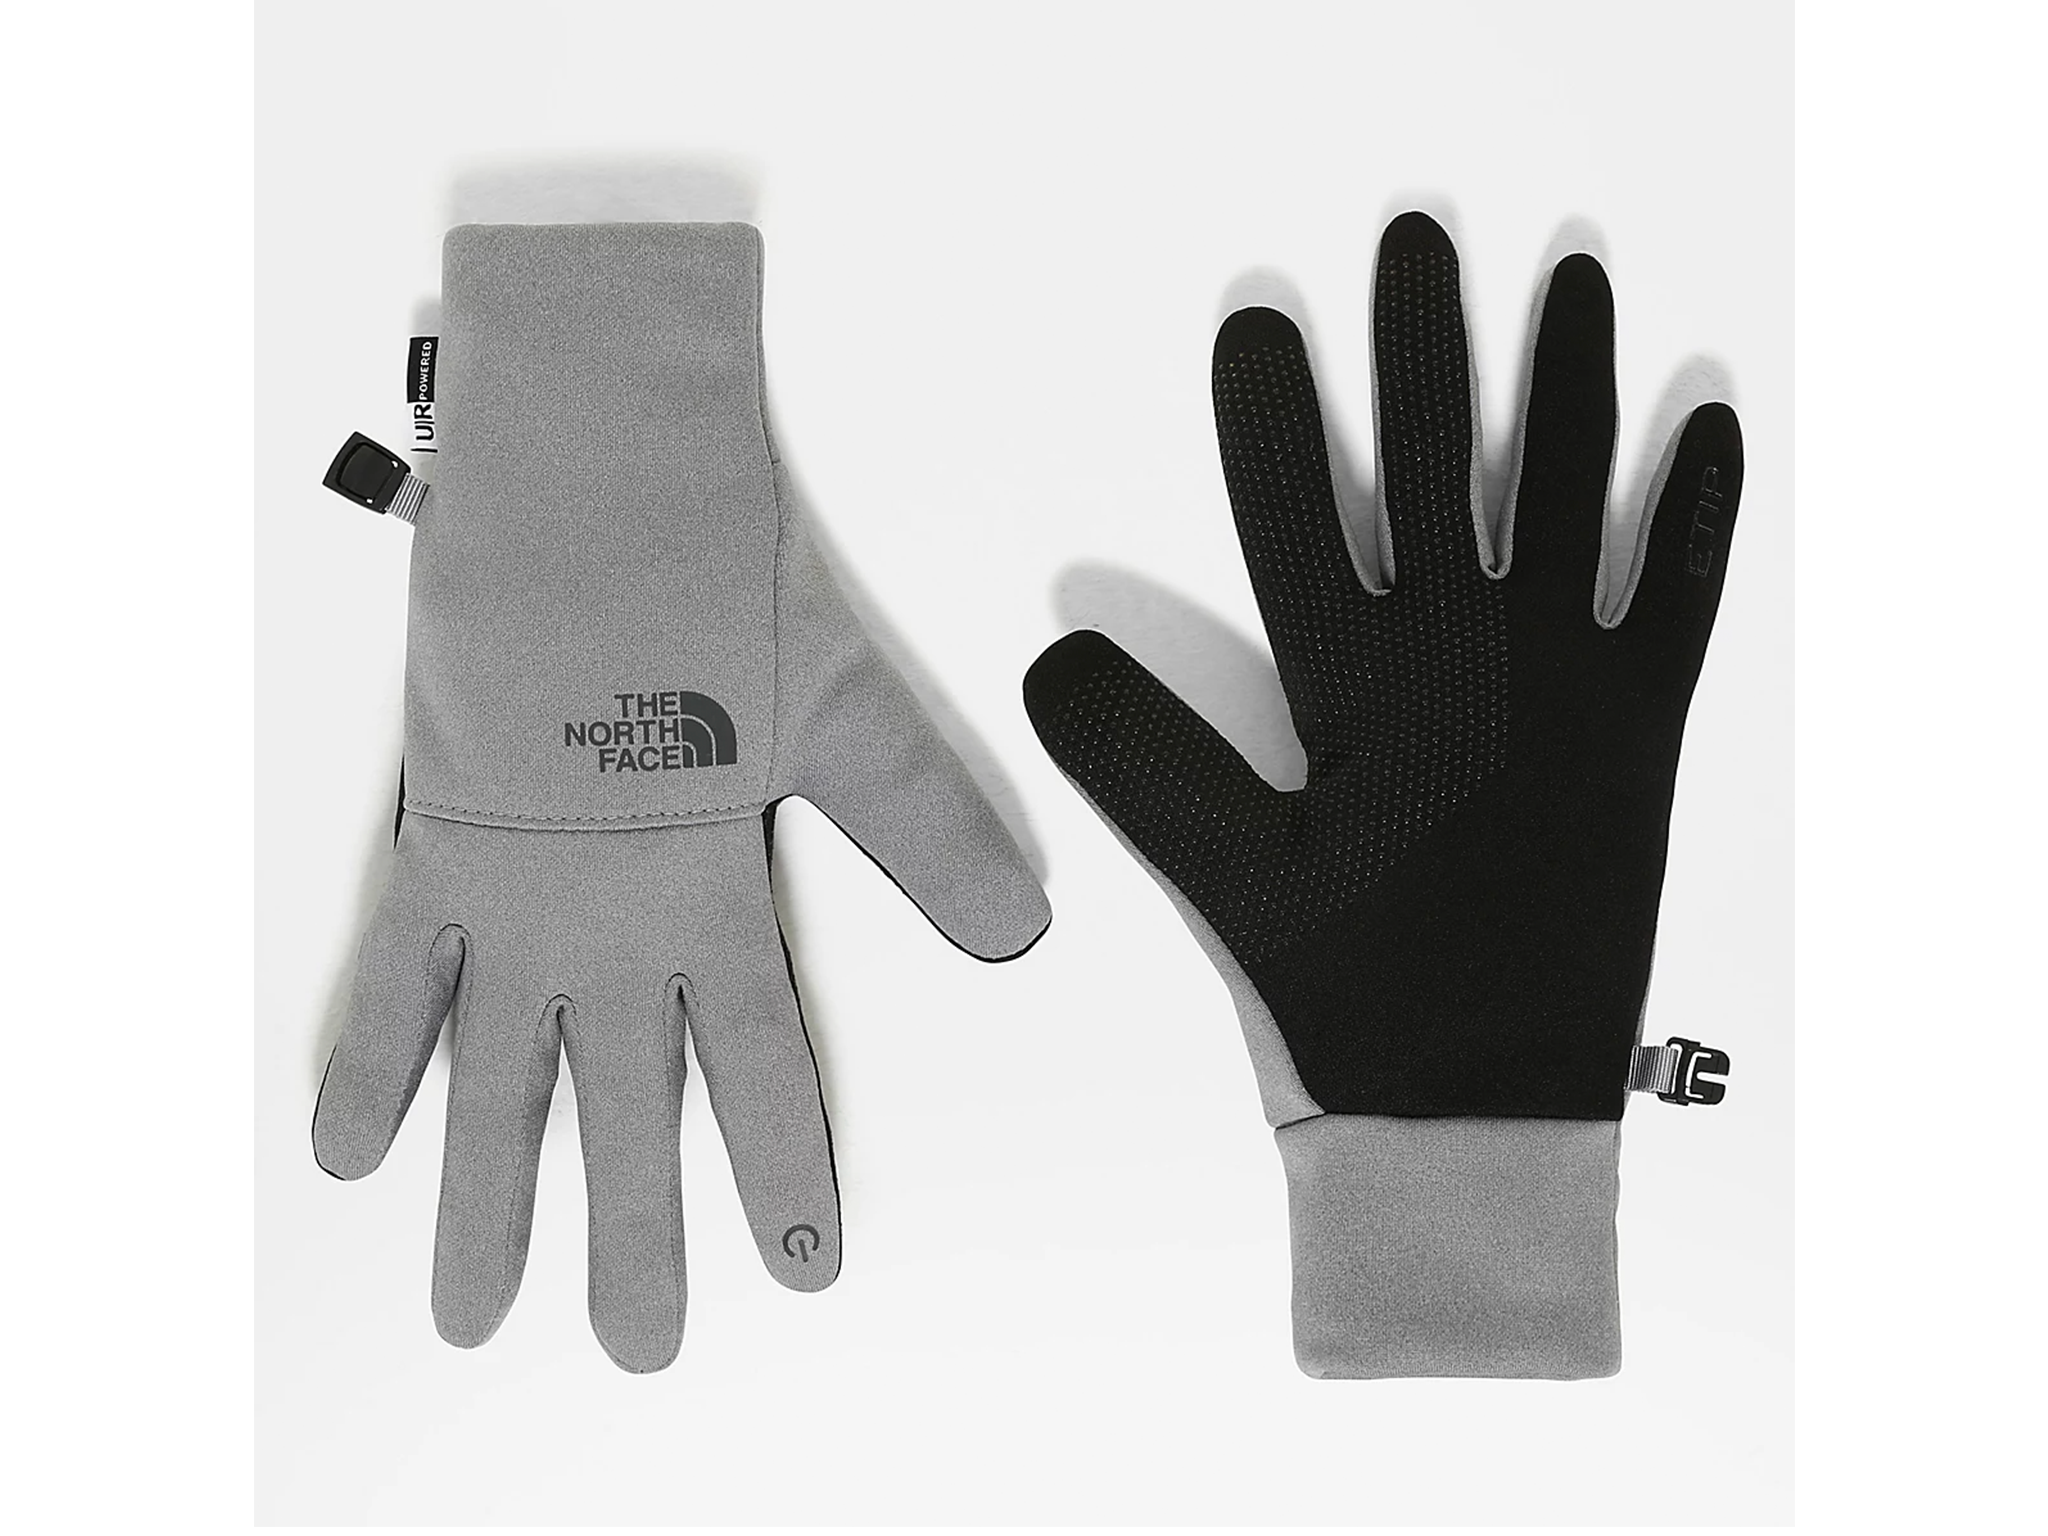 The North Face etip gloves